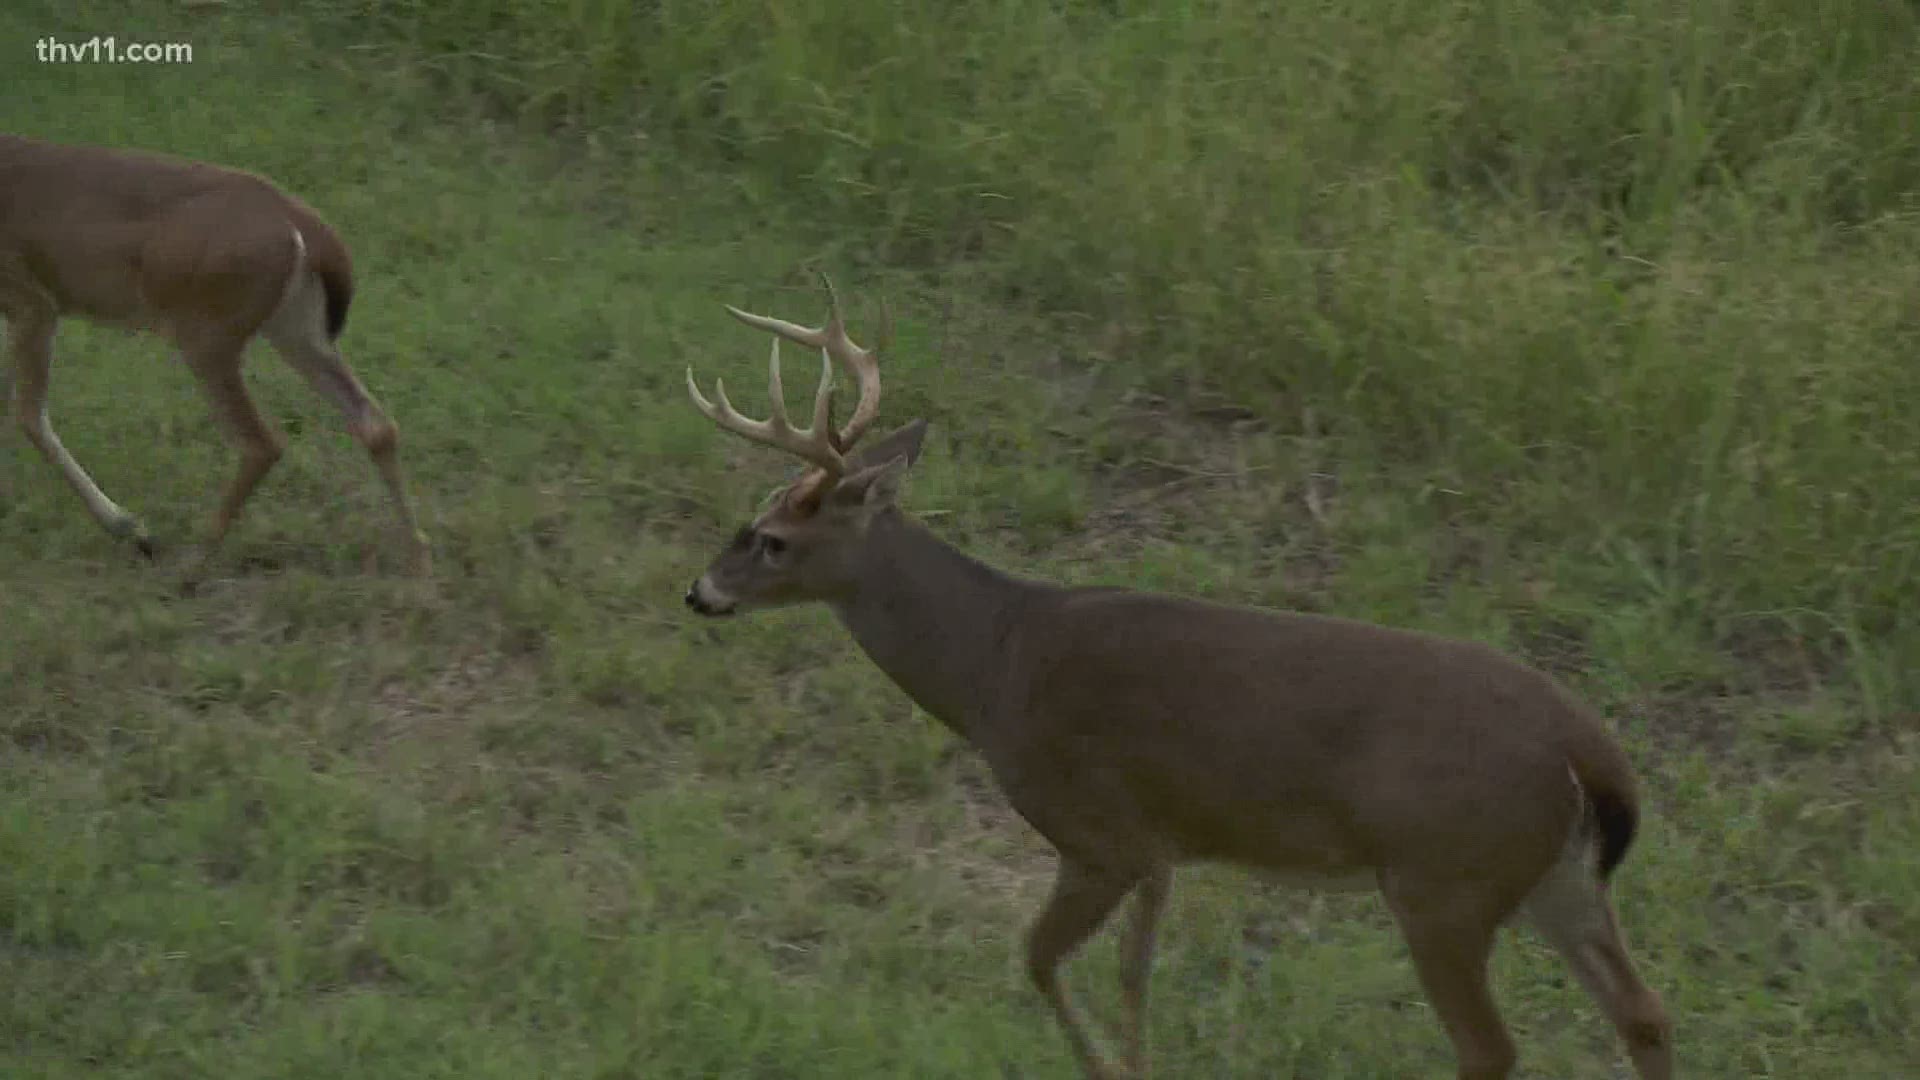 There are an estimated one million deer in Arkansas. And hunters are in the woods right now, taking their shot.